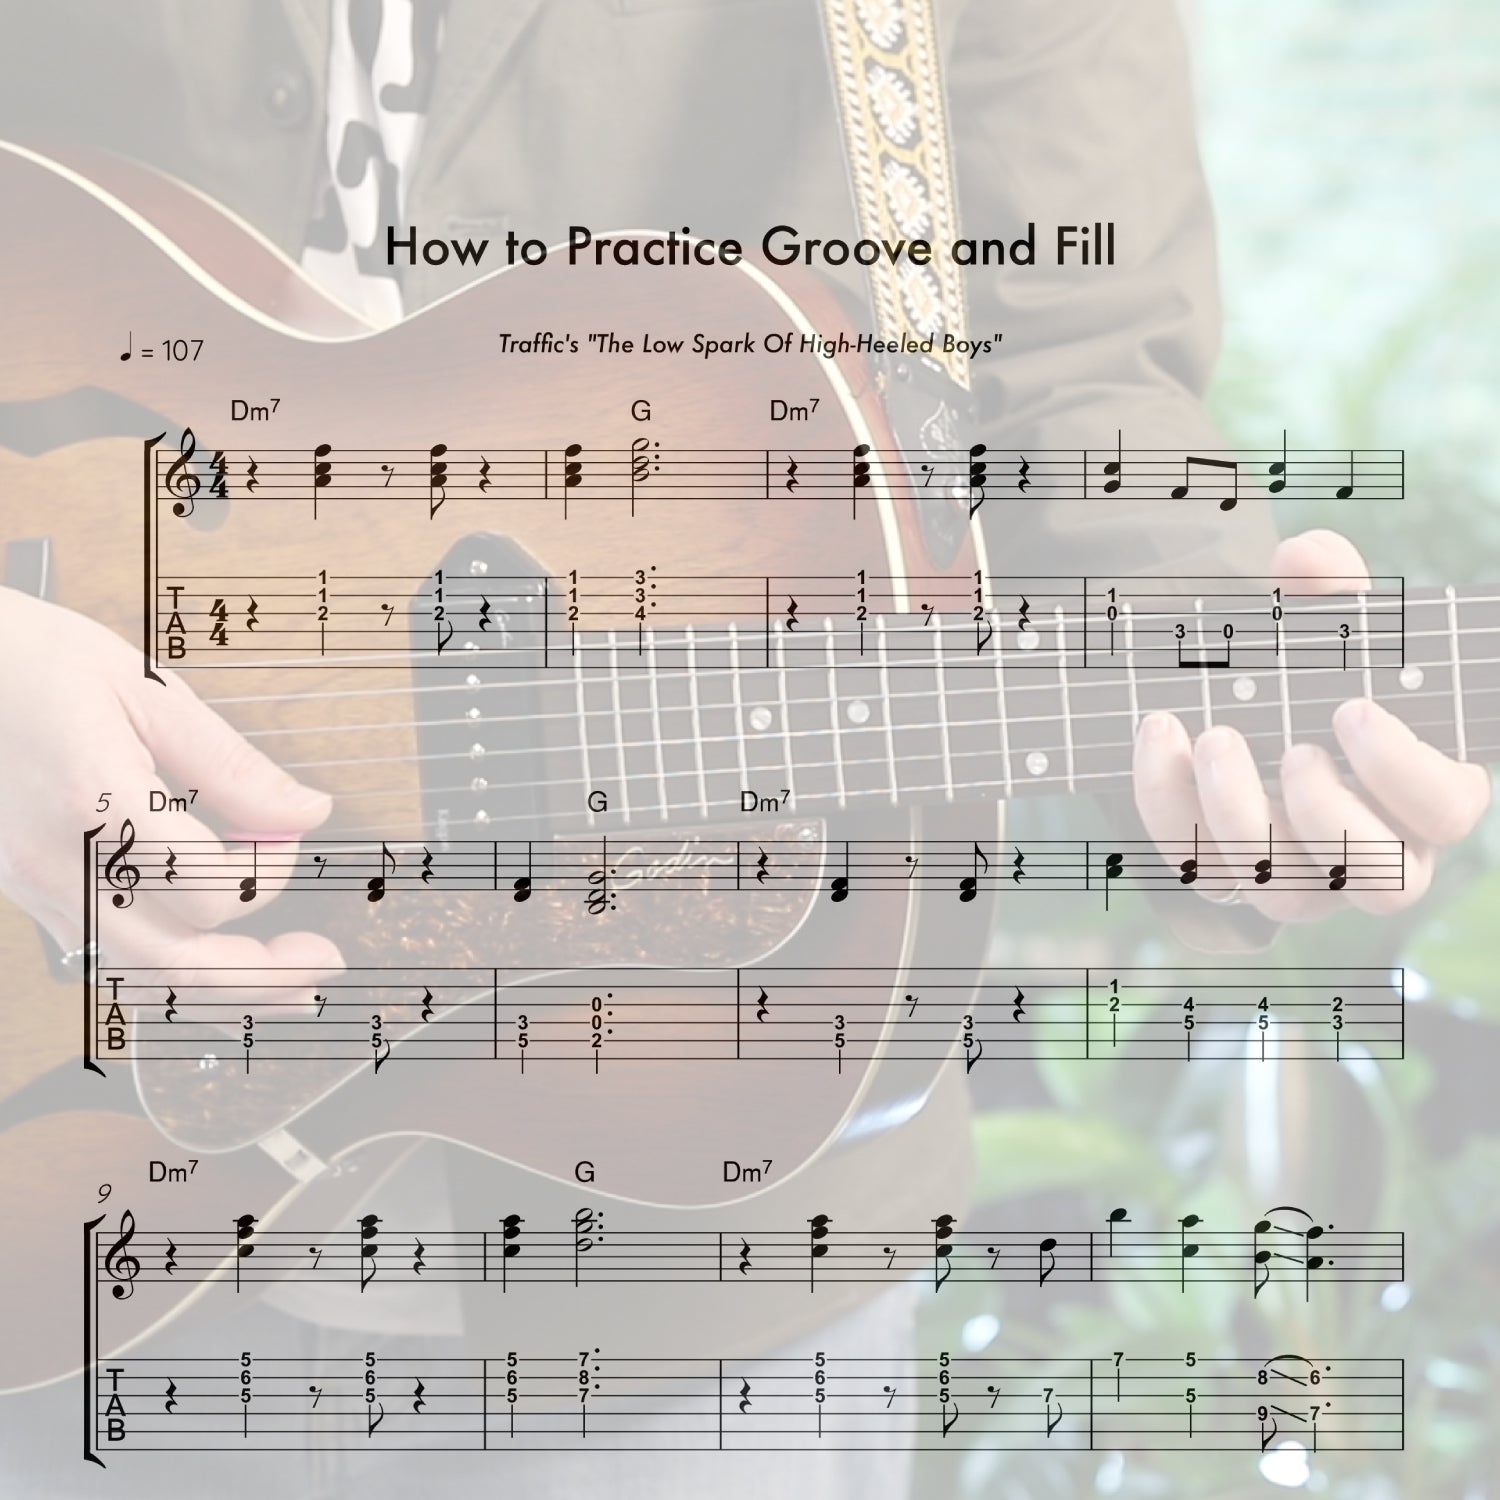 How to Practice Groove and Fills